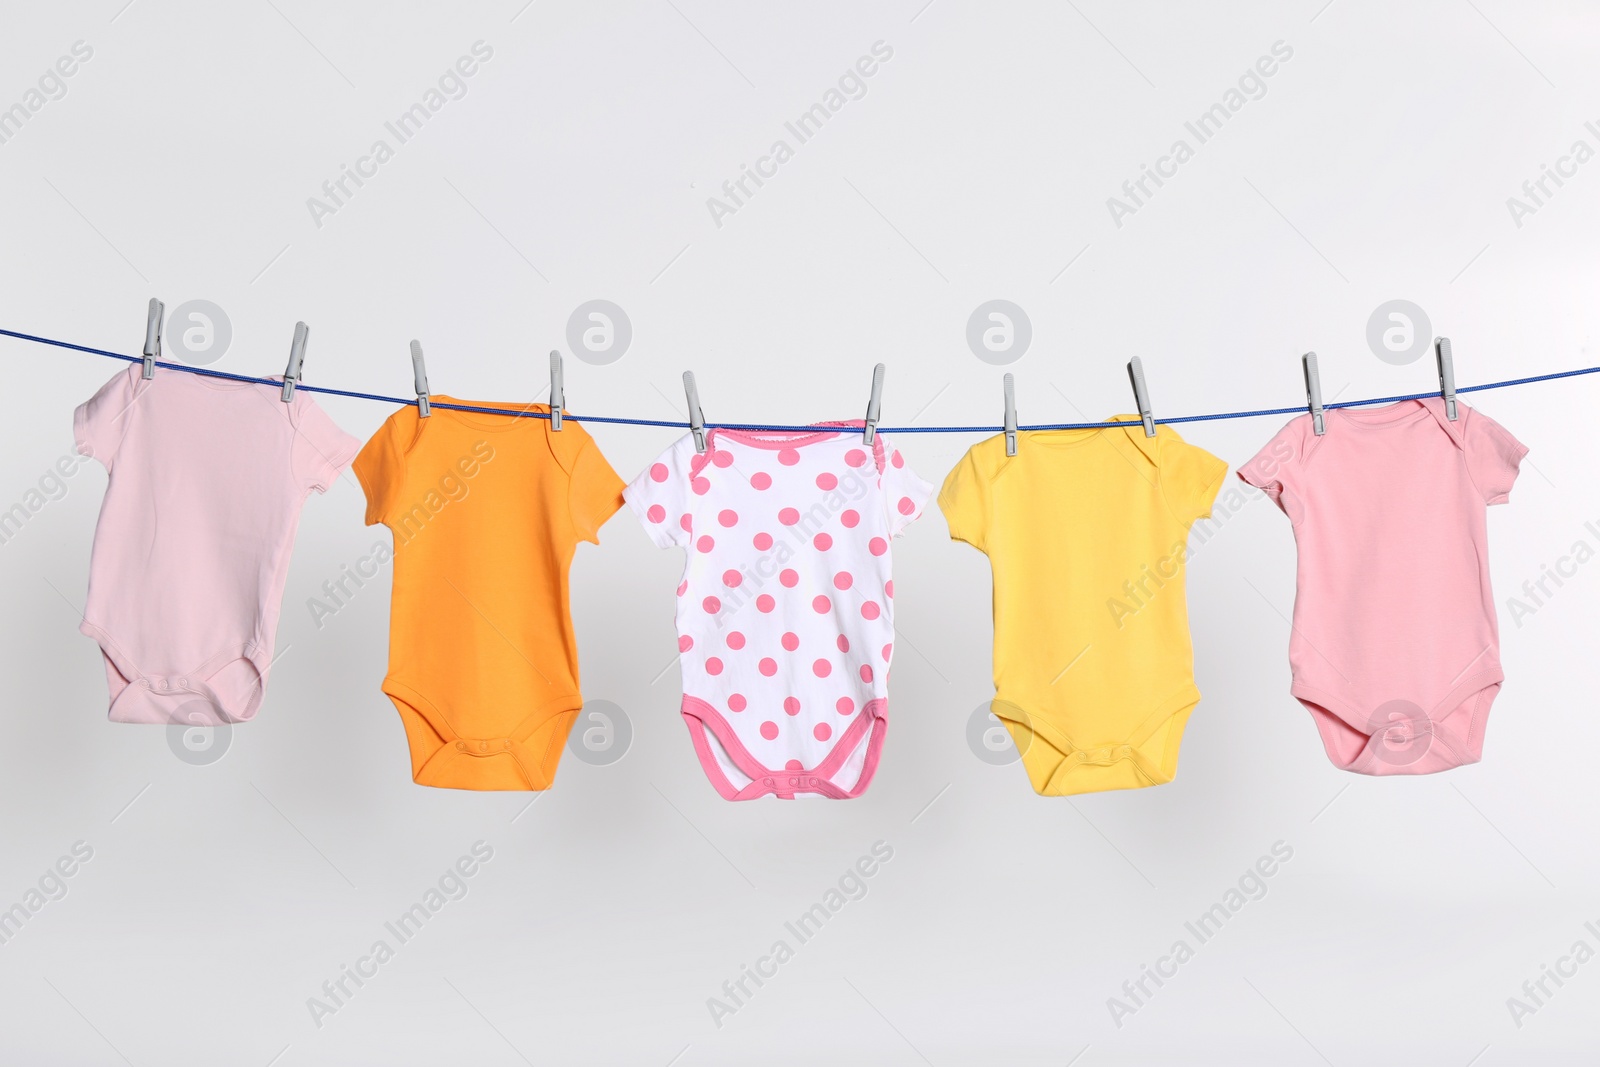 Photo of Colorful baby onesies drying on laundry line against light background